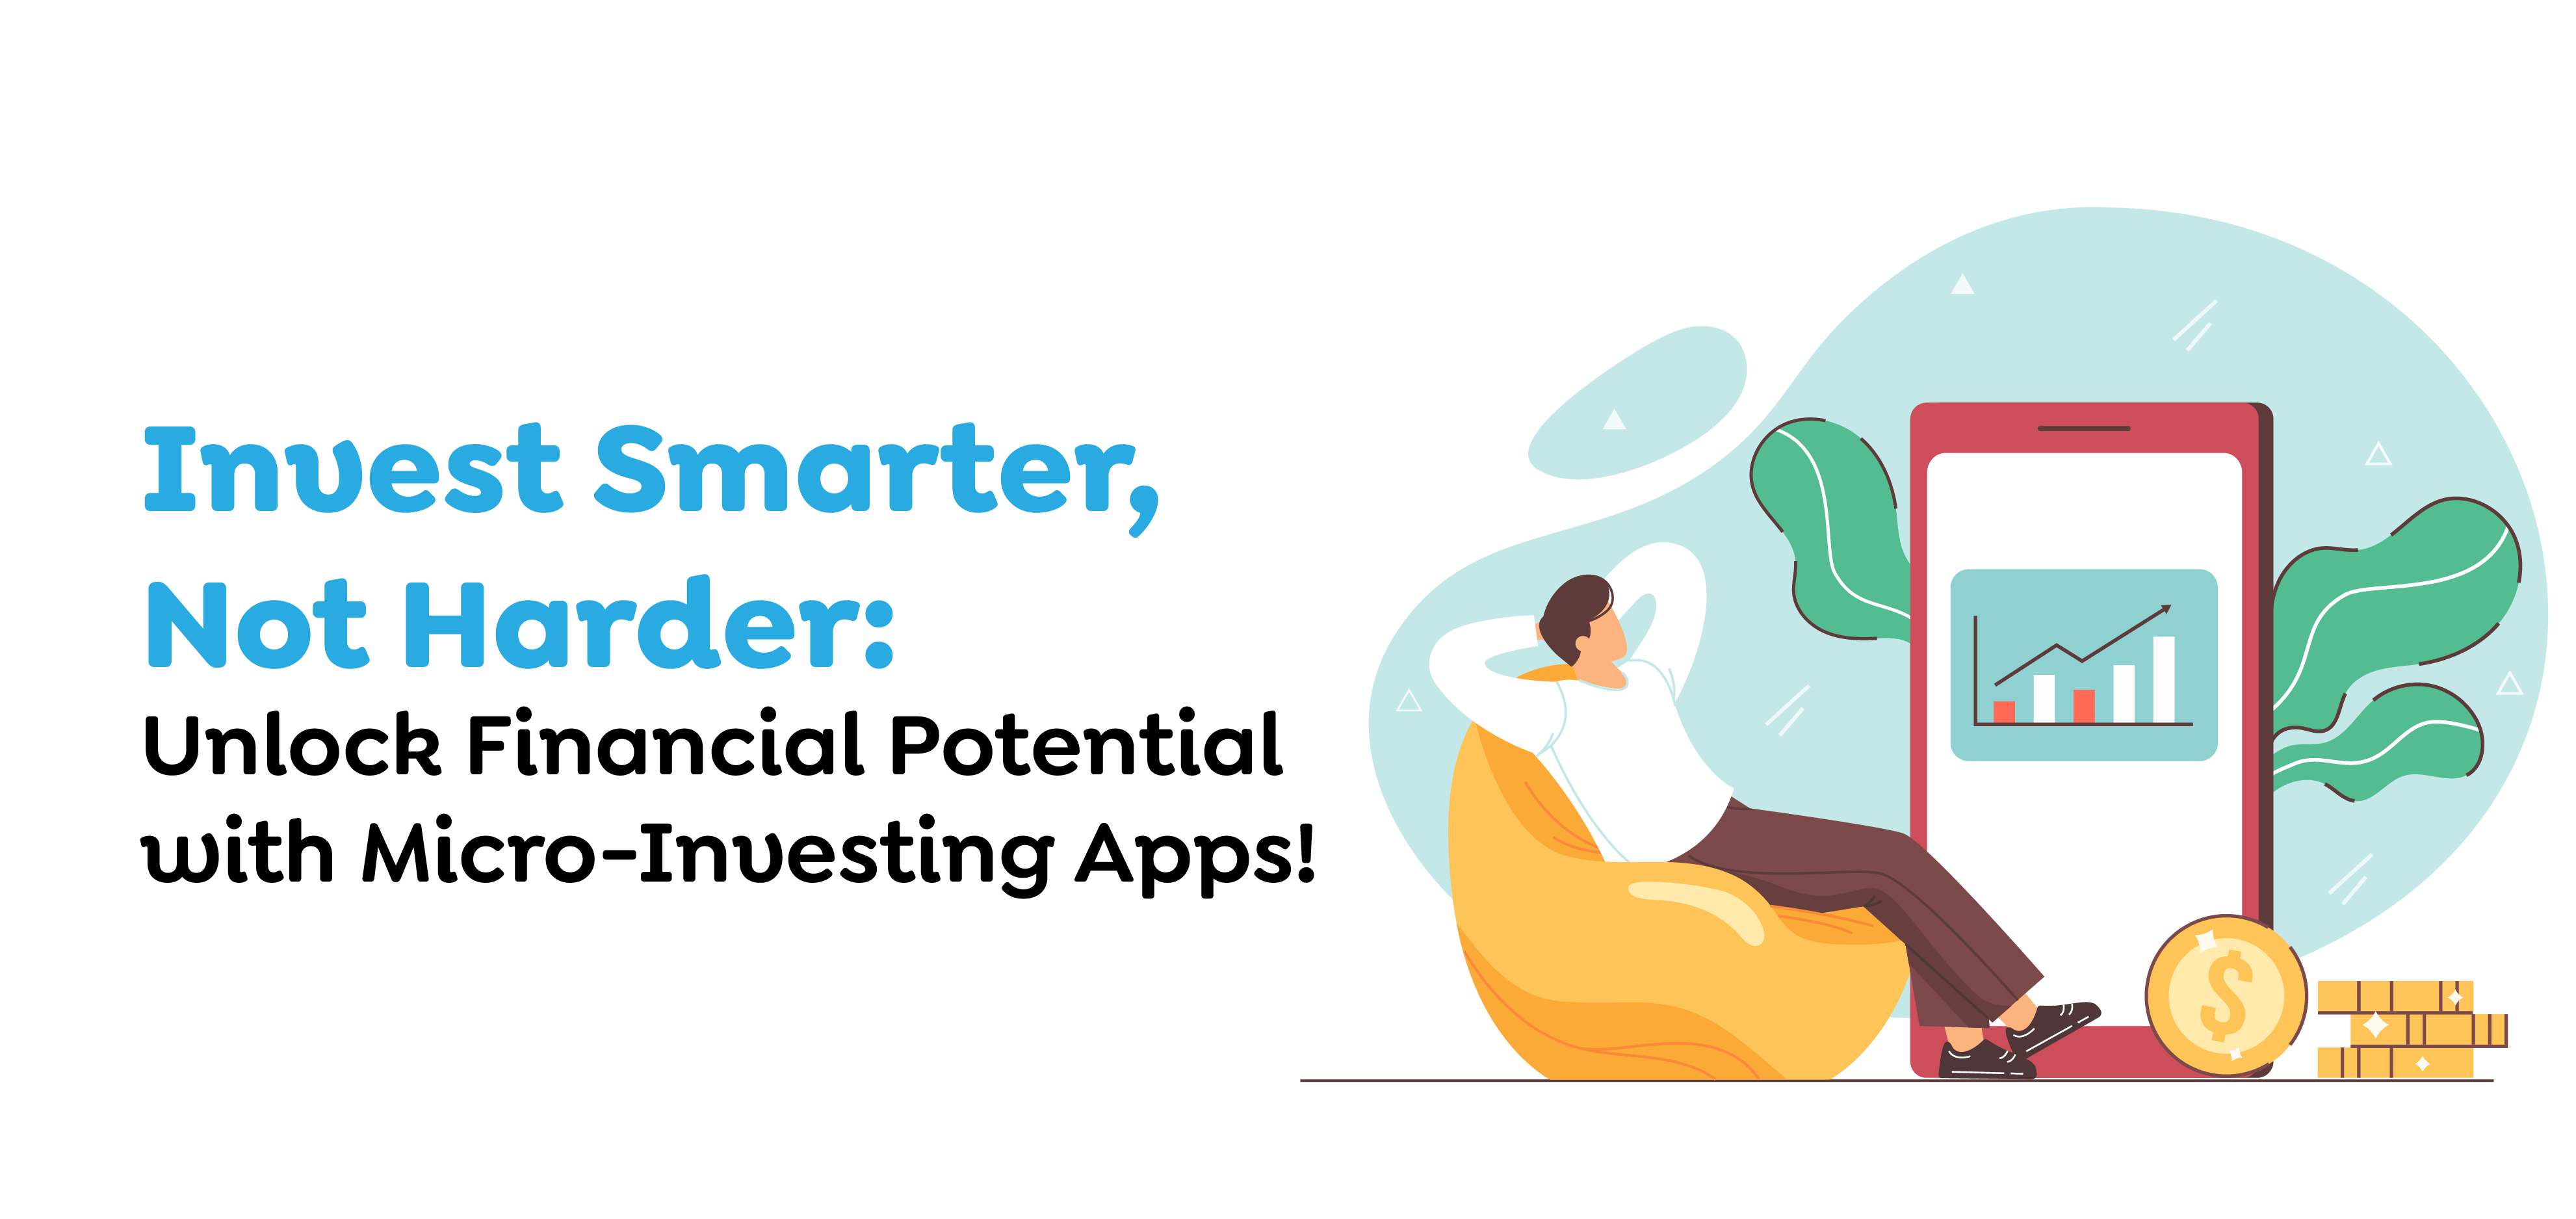 Micro-Investing Apps